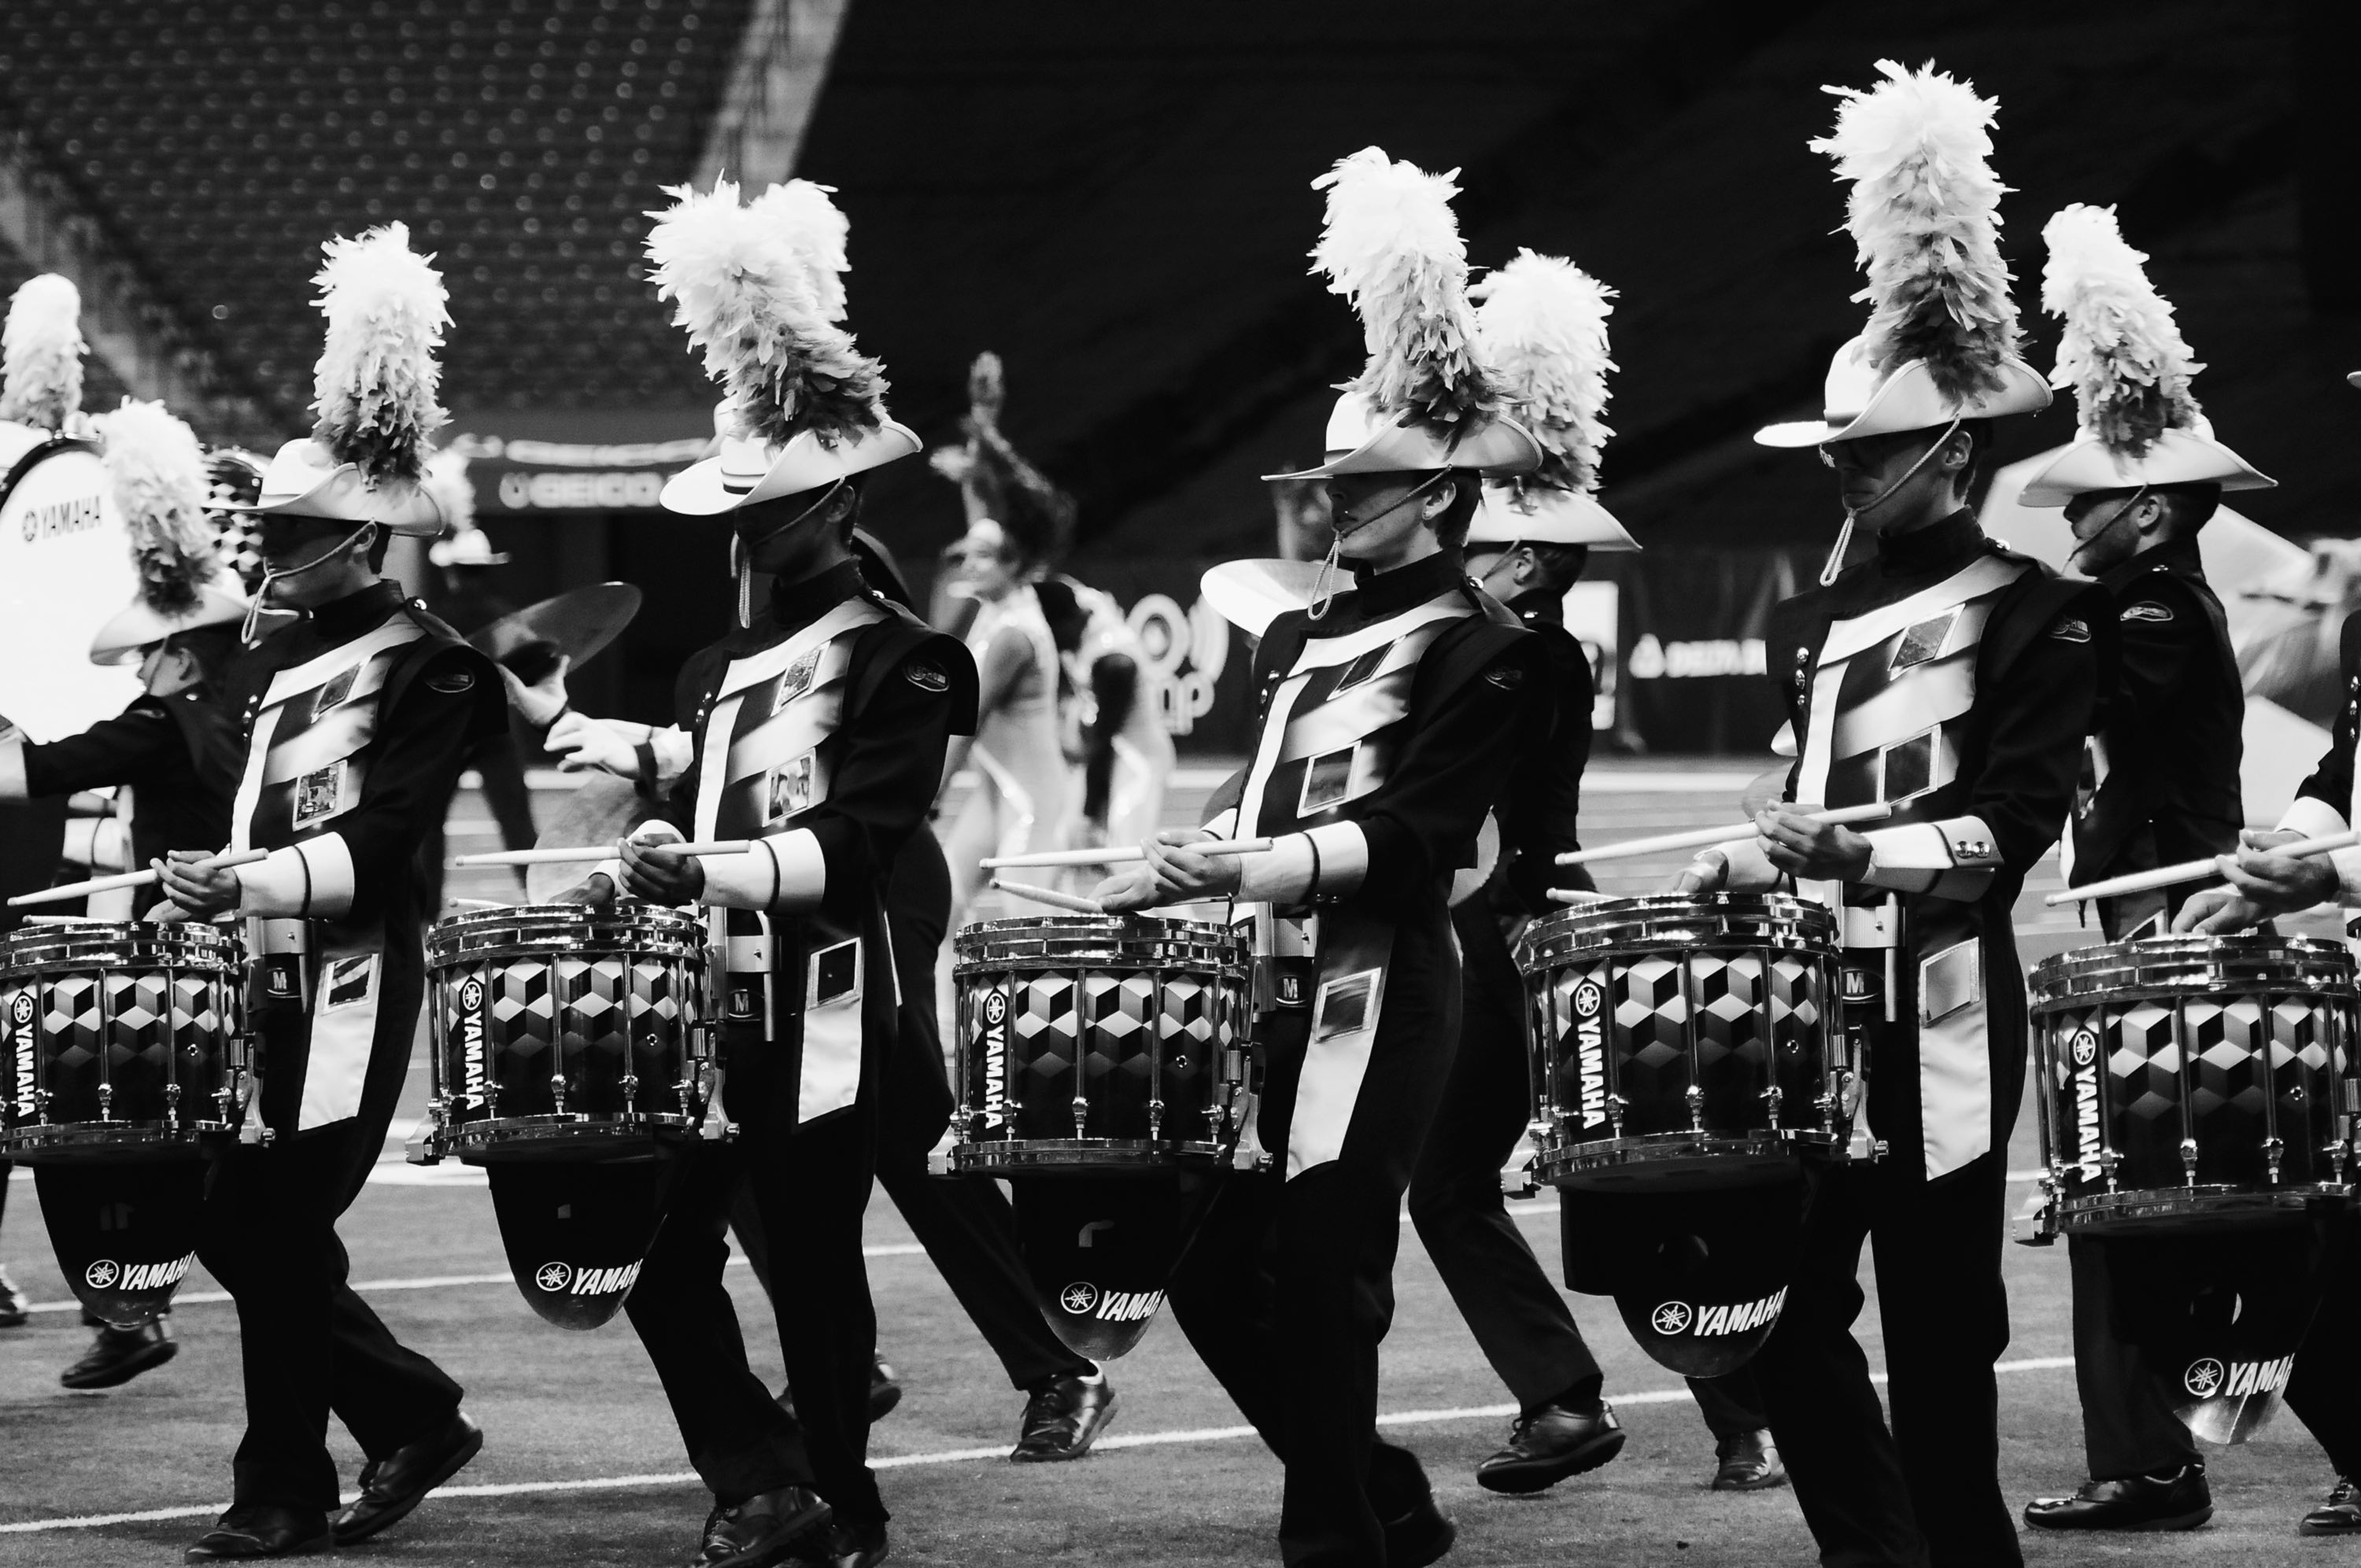 World-class drum corps from San Antonio coming to WNY in July